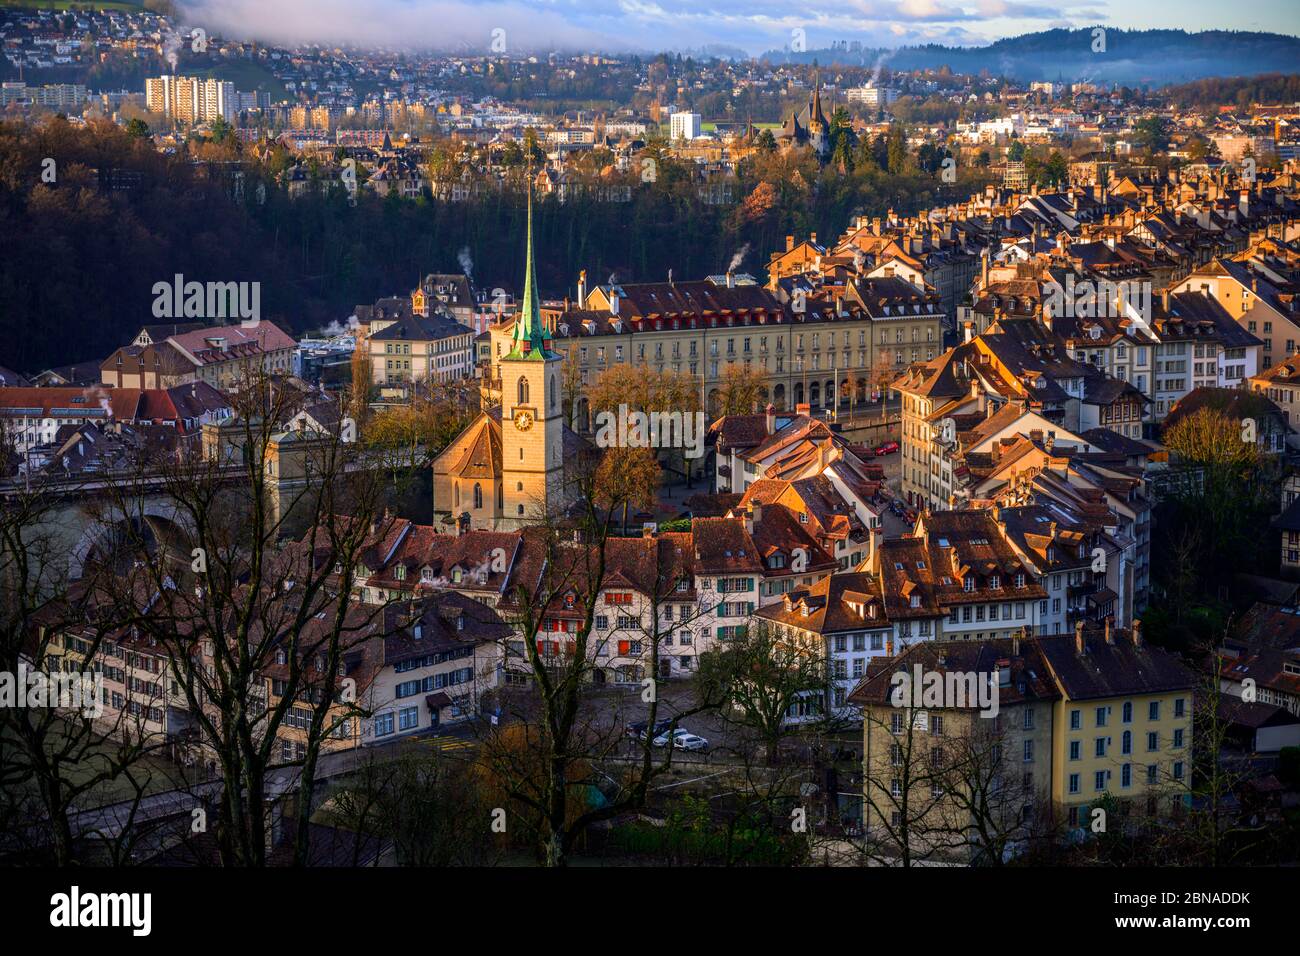 View from the rose garden to the old town, Nydeggkirche, Nydegg district, Bern, Canton of Bern, Switzerland, Europe Stock Photo